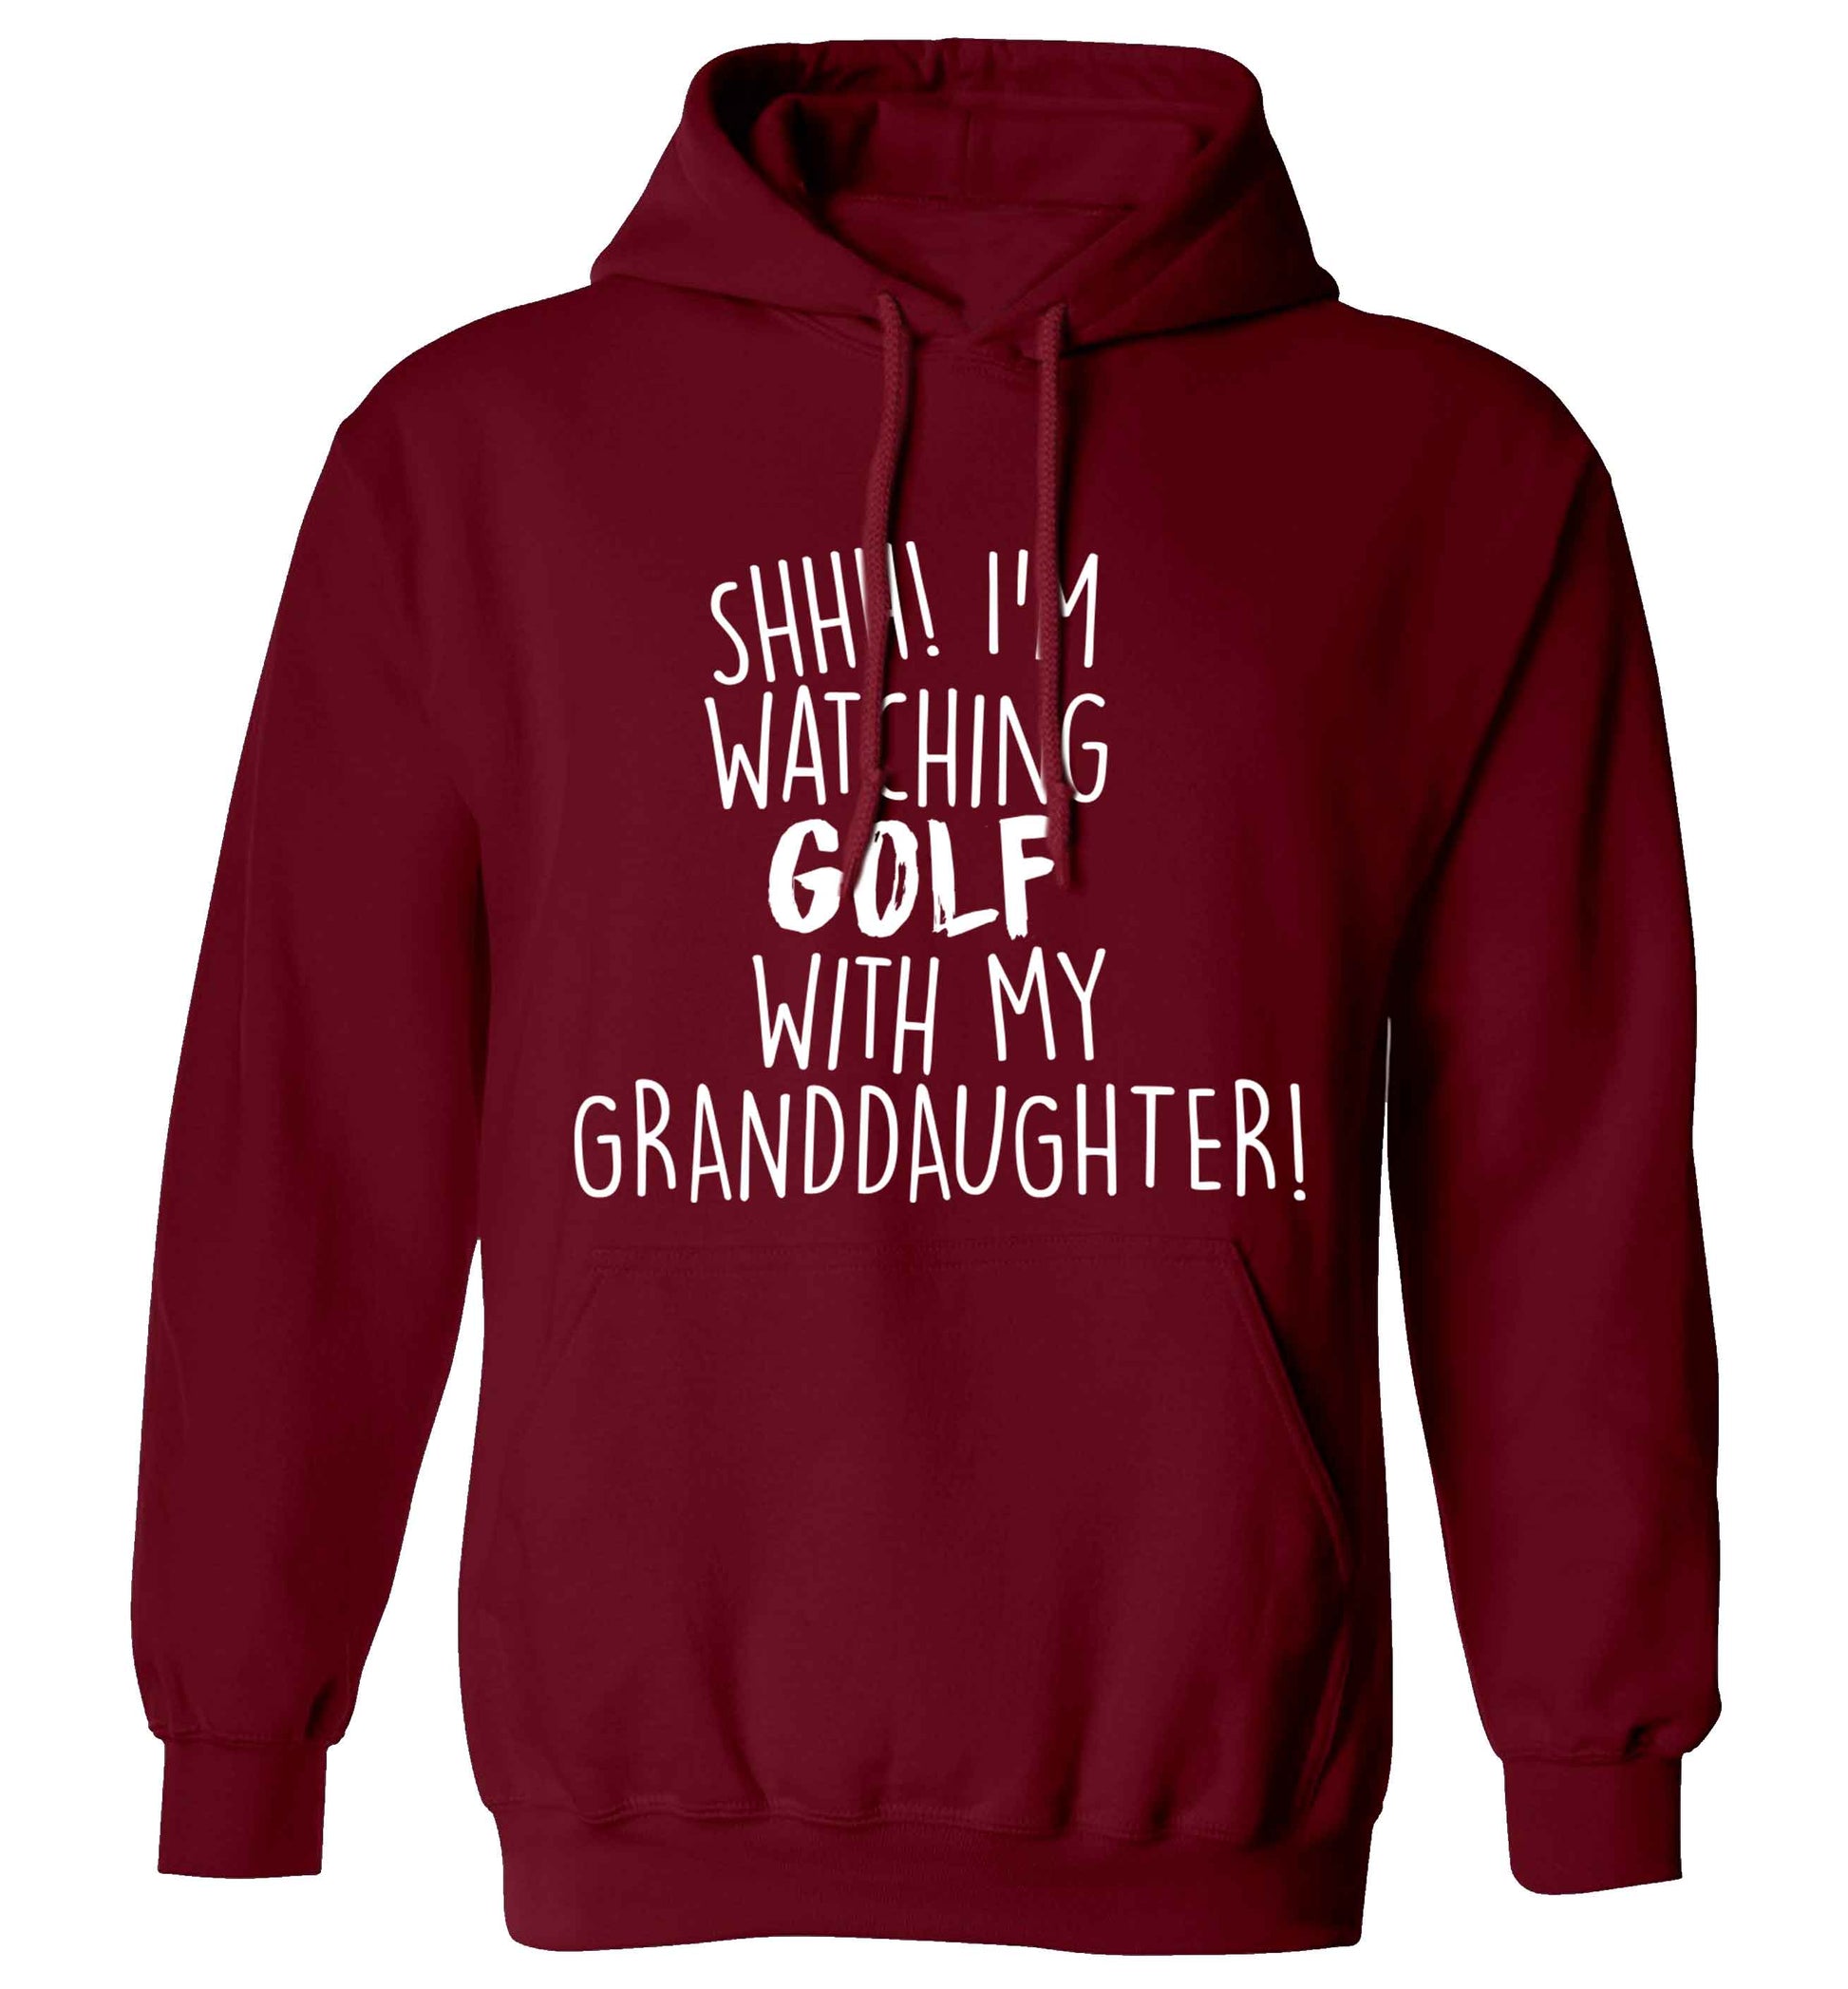 Shh I'm watching golf with my granddaughter adults unisex maroon hoodie 2XL